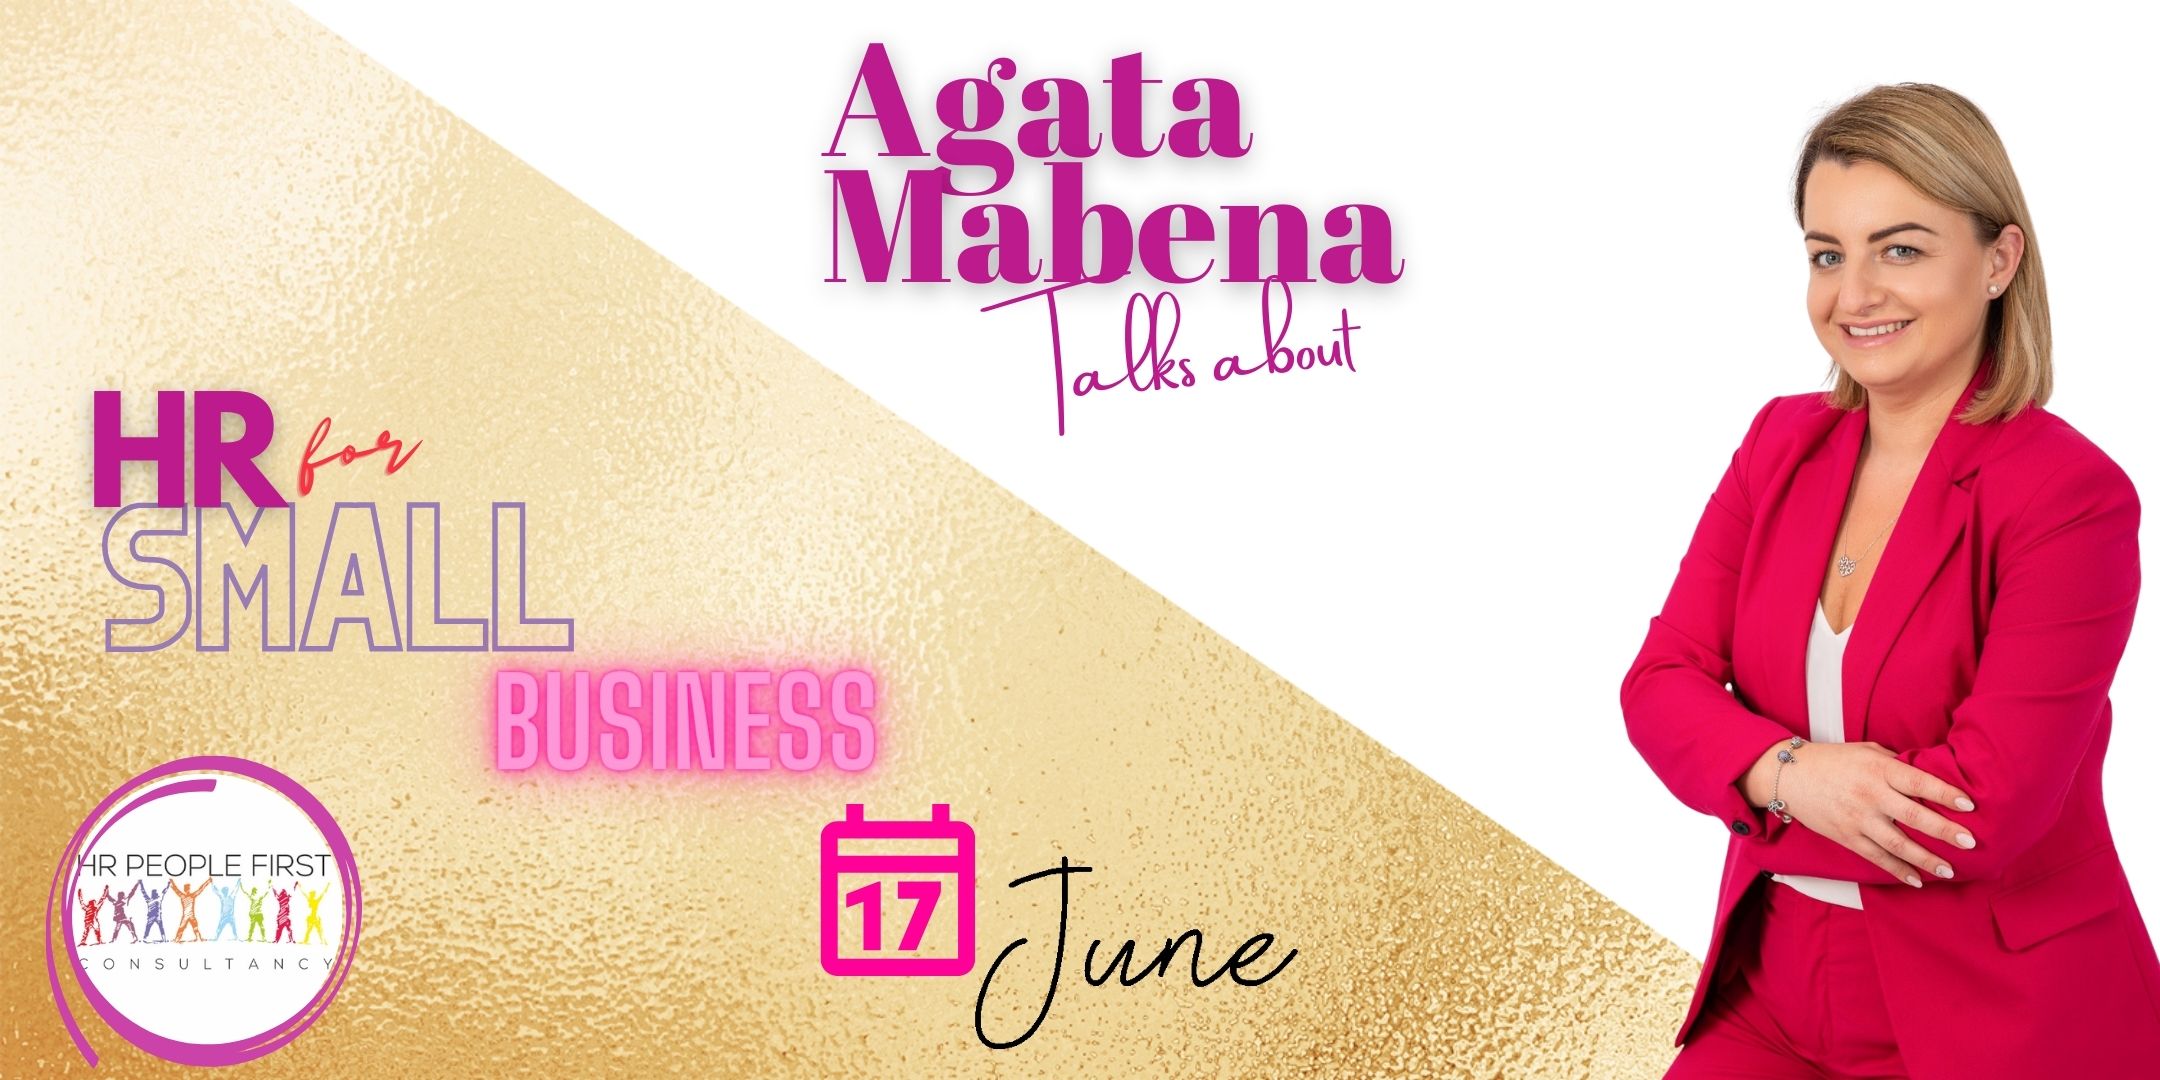 WBL Insights: HR for Small Business by Agata Mabena